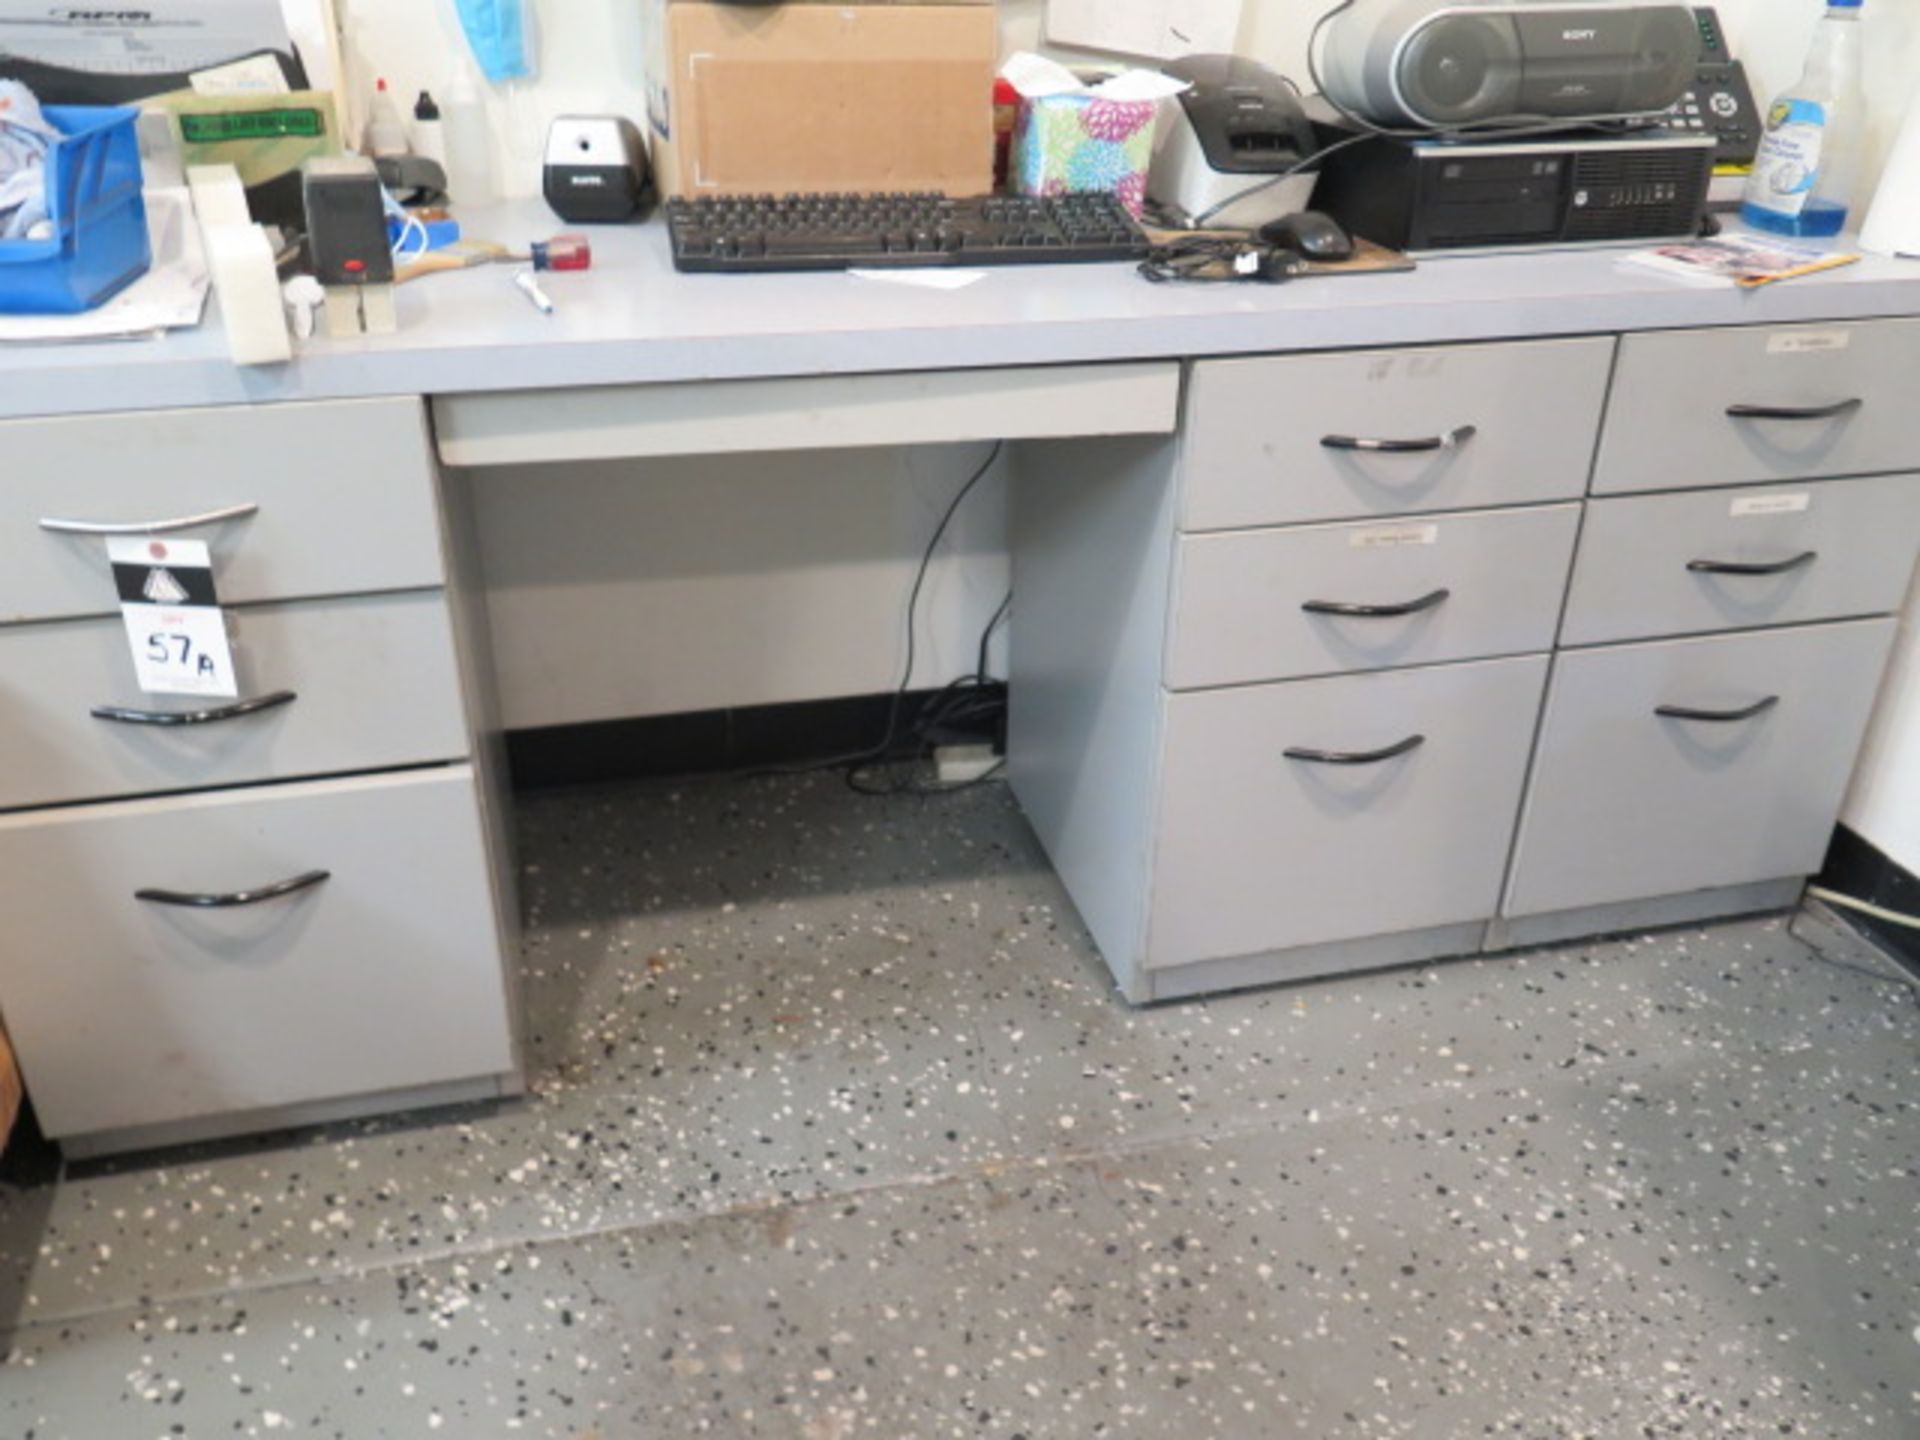 Desk and File Cabinet (SOLD AS-IS - NO WARRANTY)